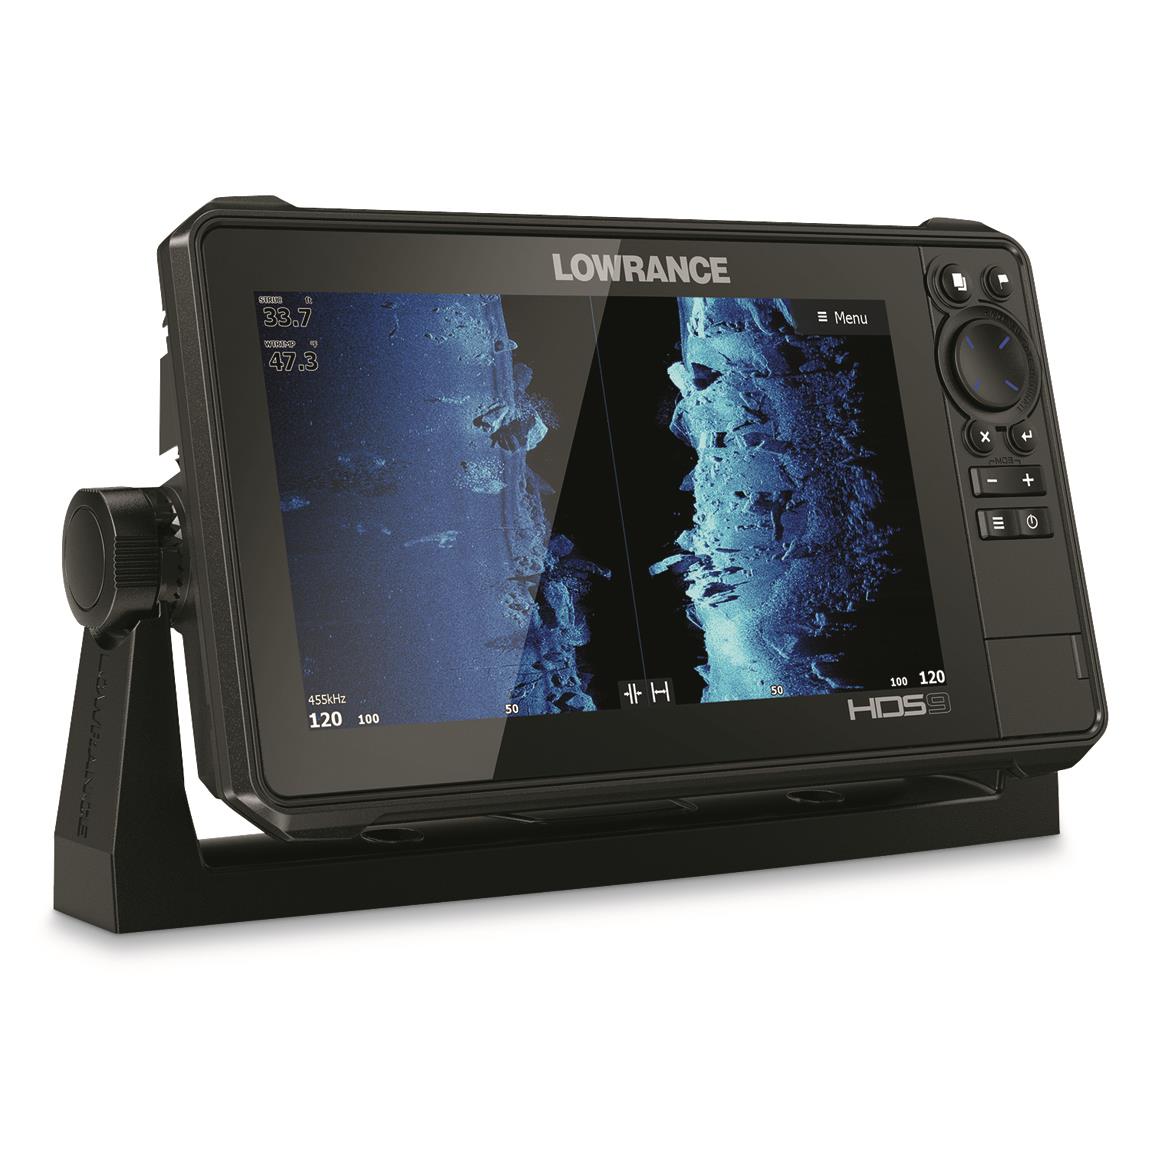 Lowrance HDS-9 Live Fishfinder with Active Imaging 3-in-1 for sale online 